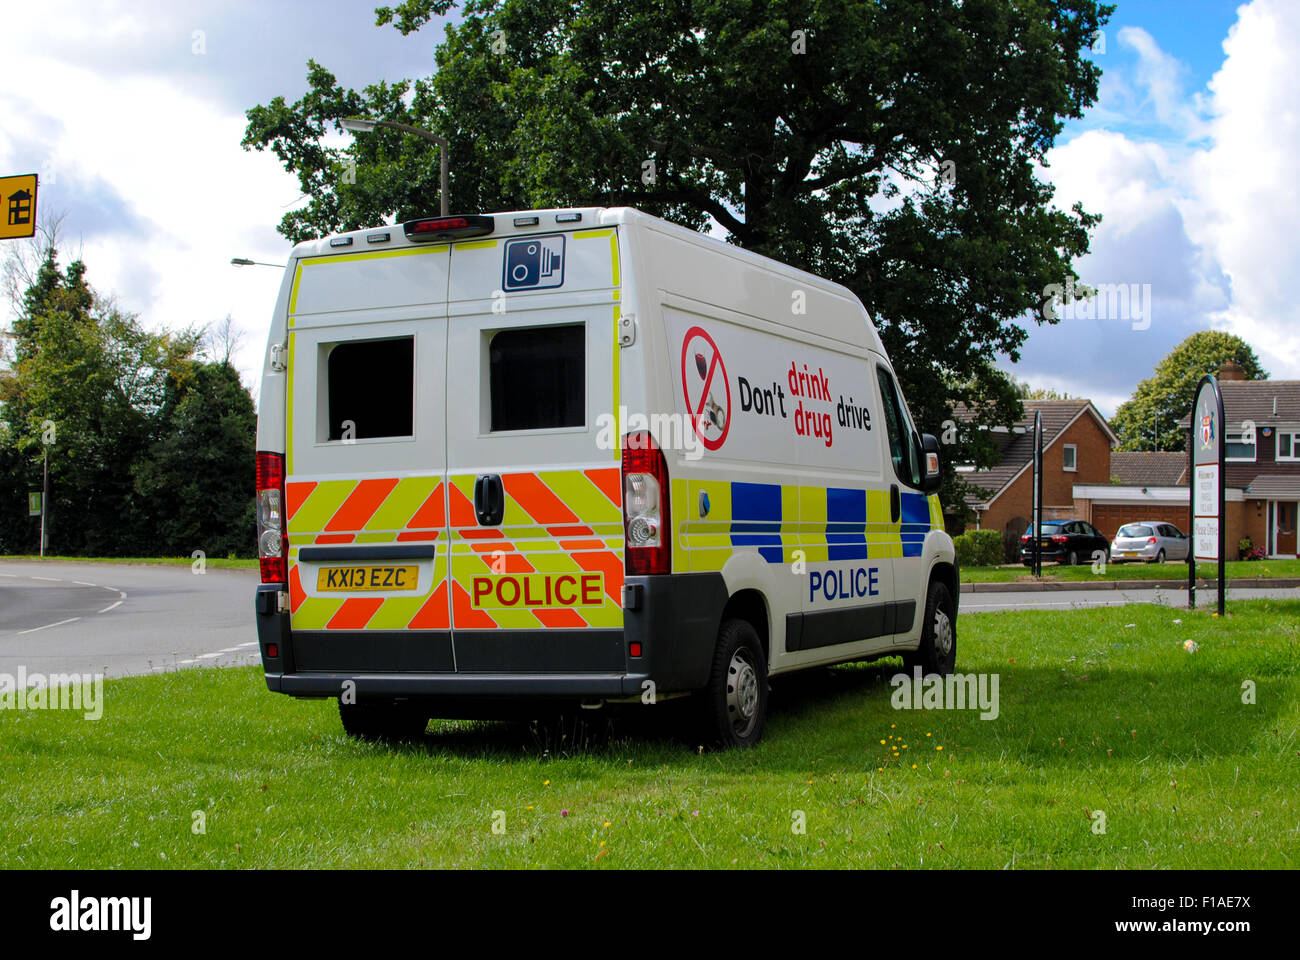 Police Camera Van High Resolution Stock Photography and Images - Alamy